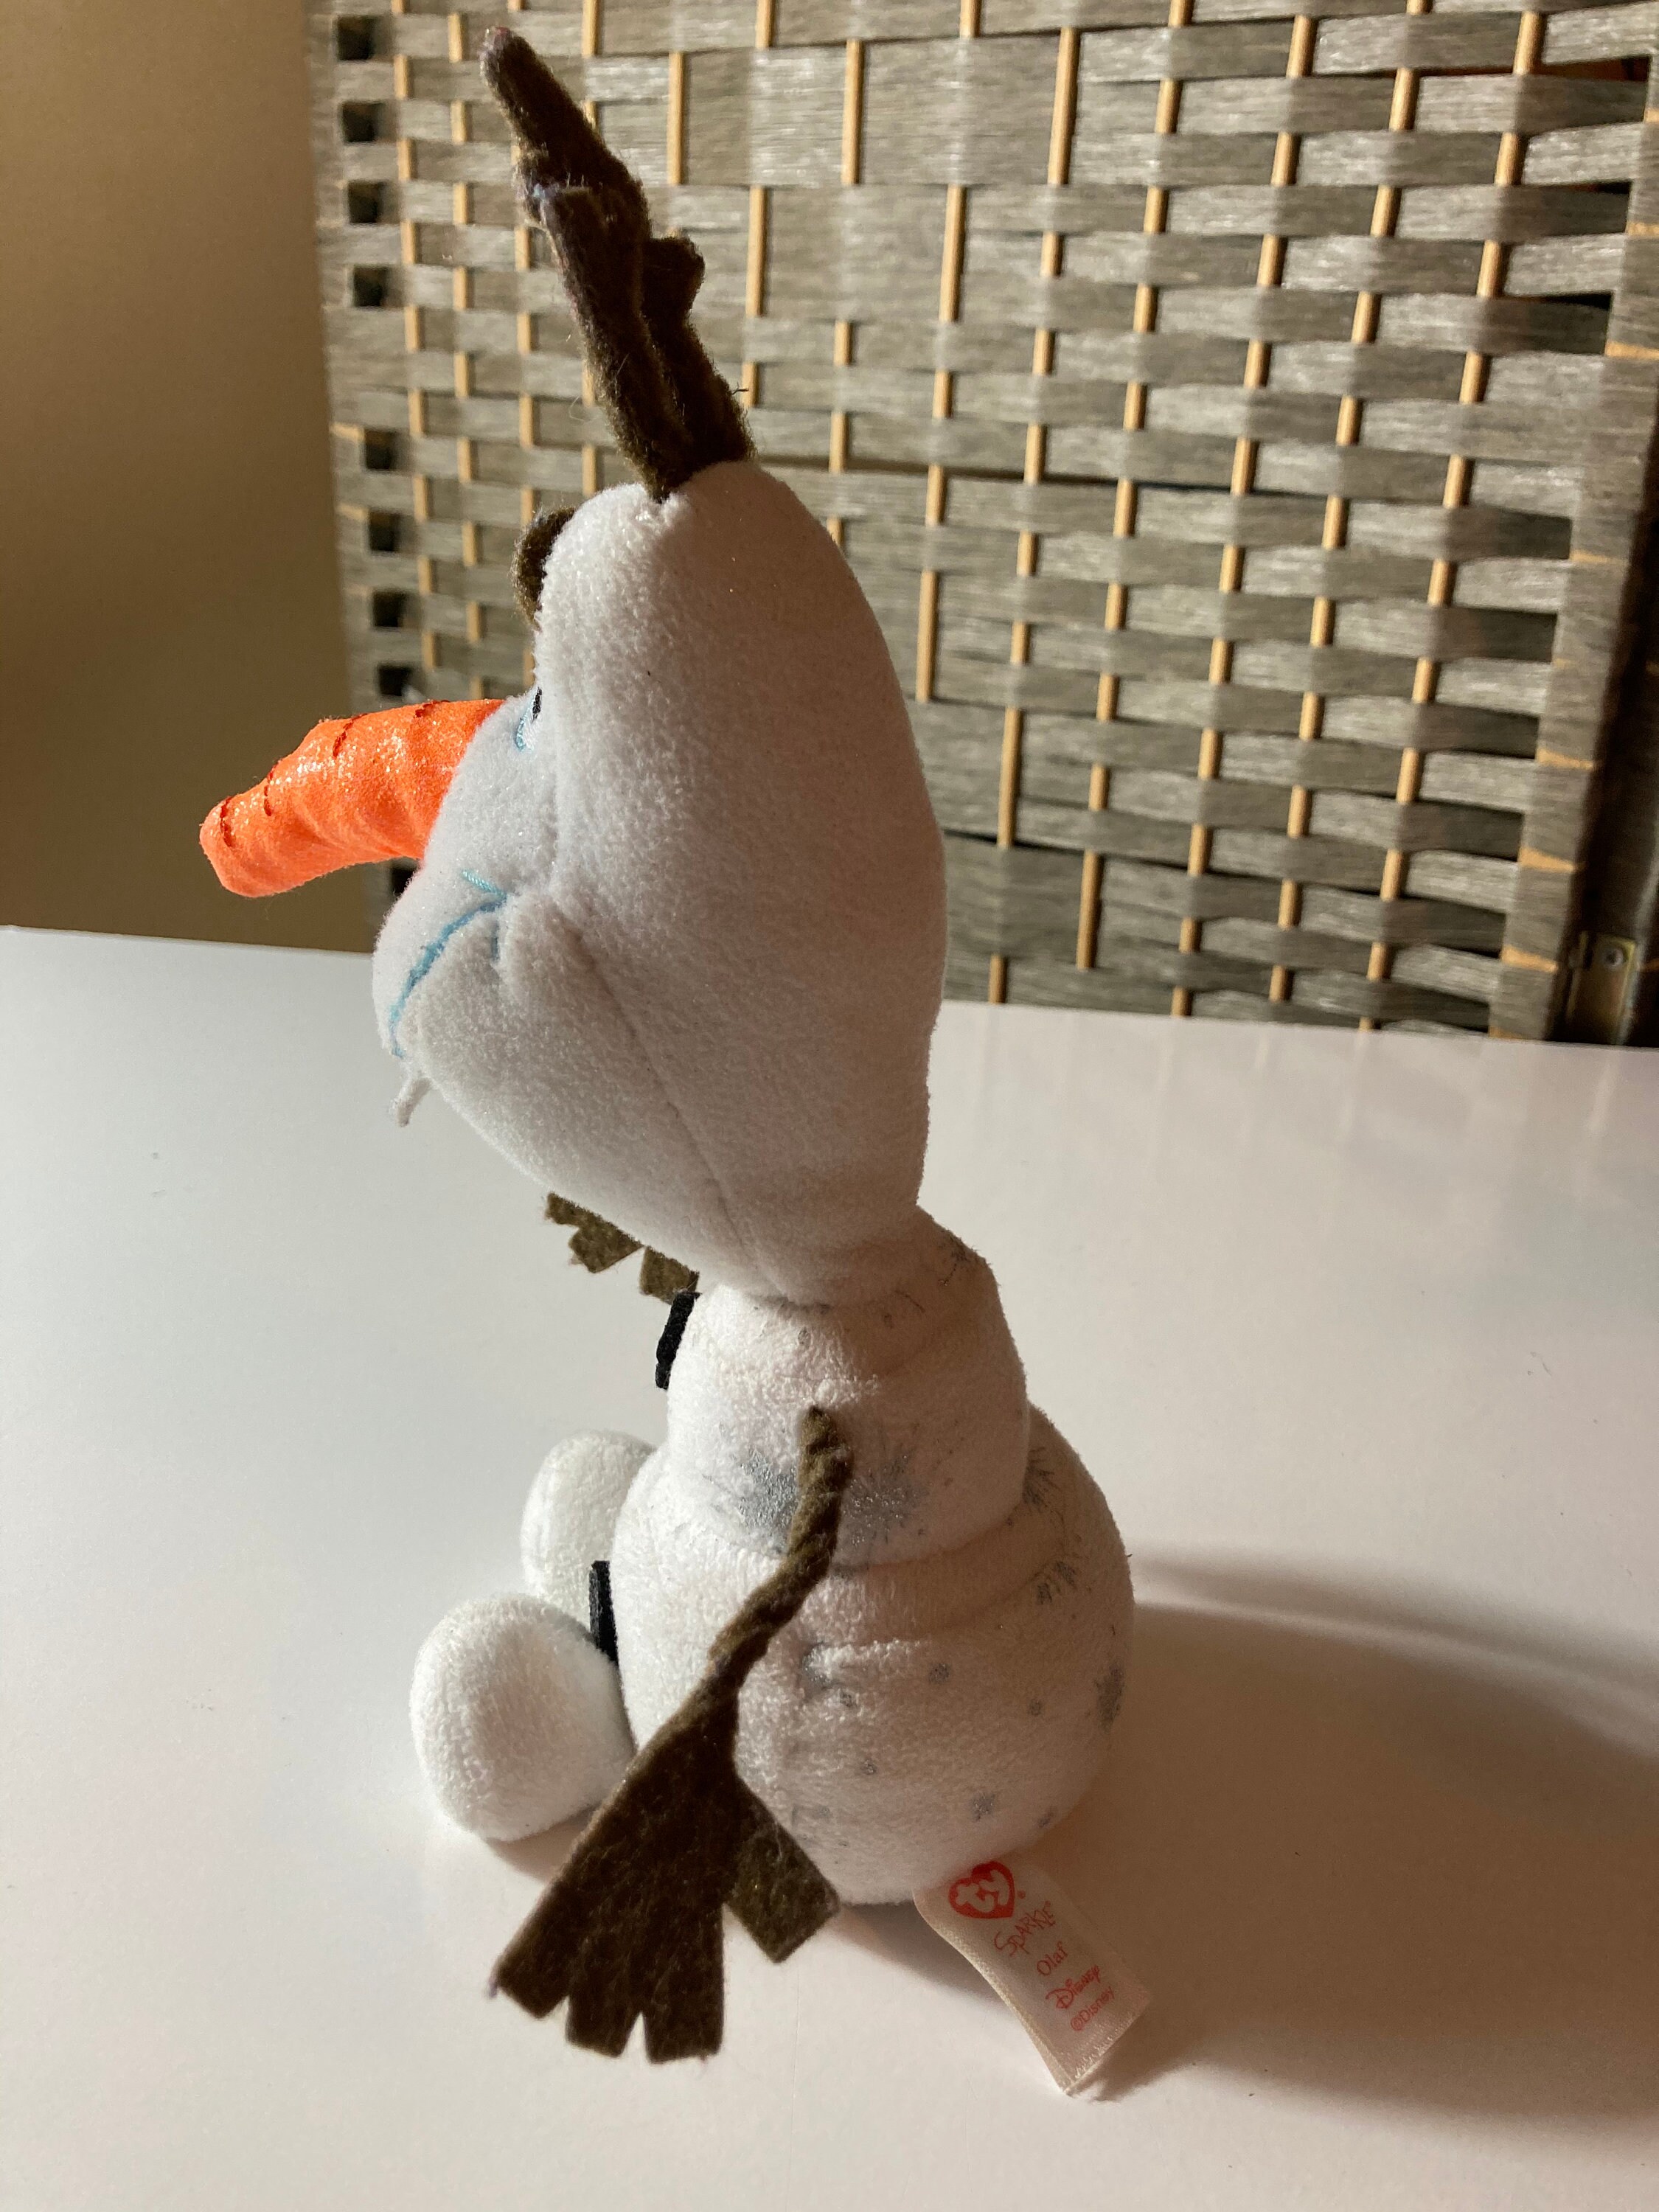 Disney Frozen Olaf Ty Large Plush – Xenos Candy N Gifts